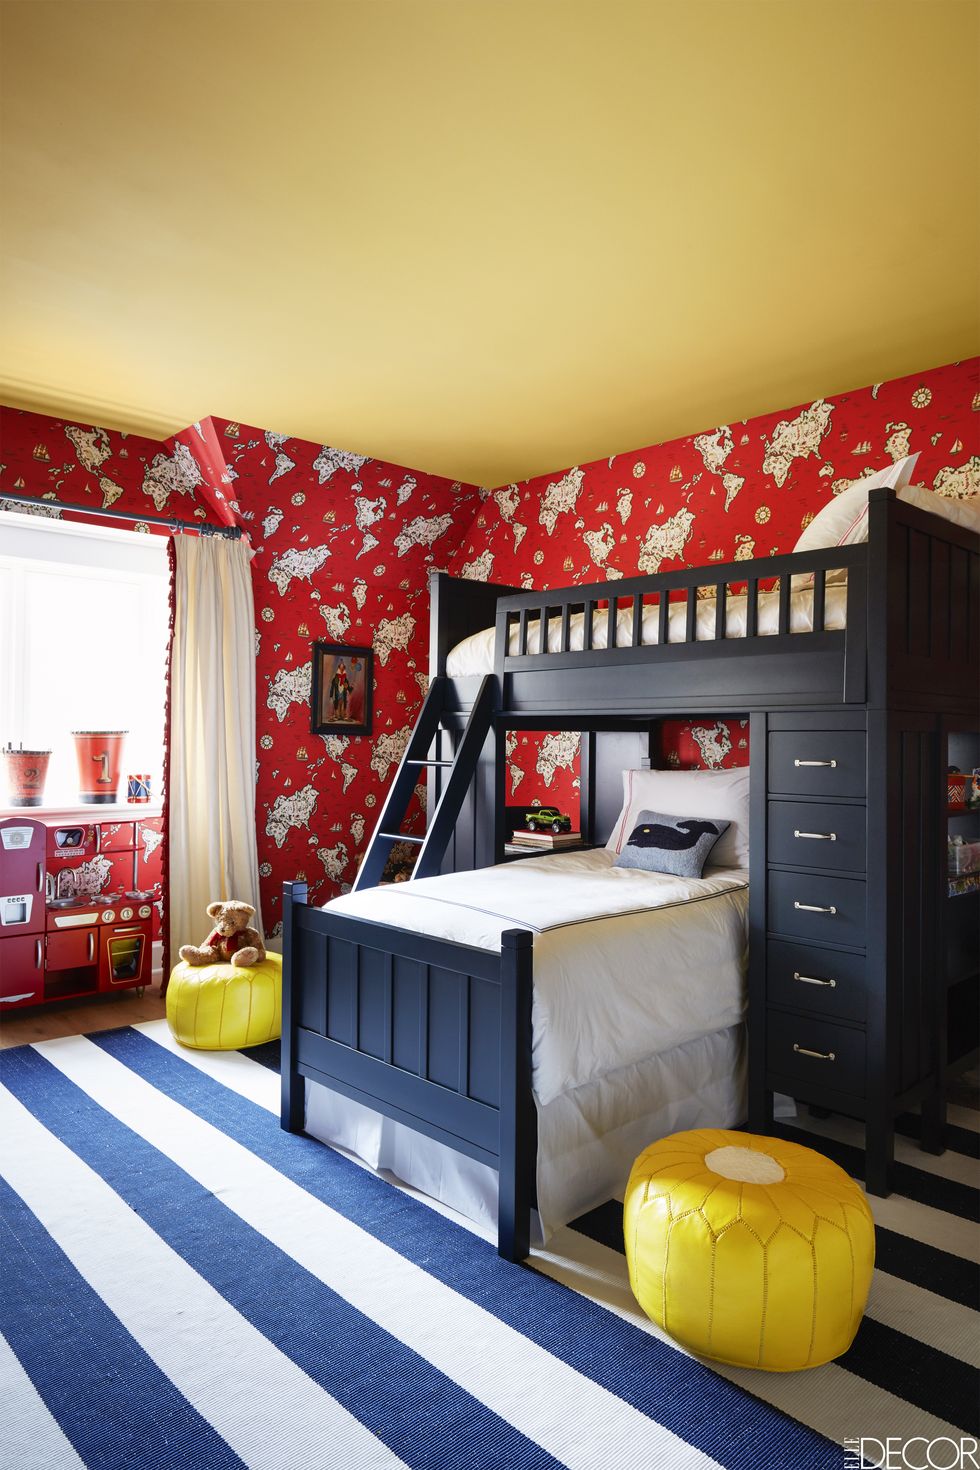 Things to keep in mind when designing a room for your teenager